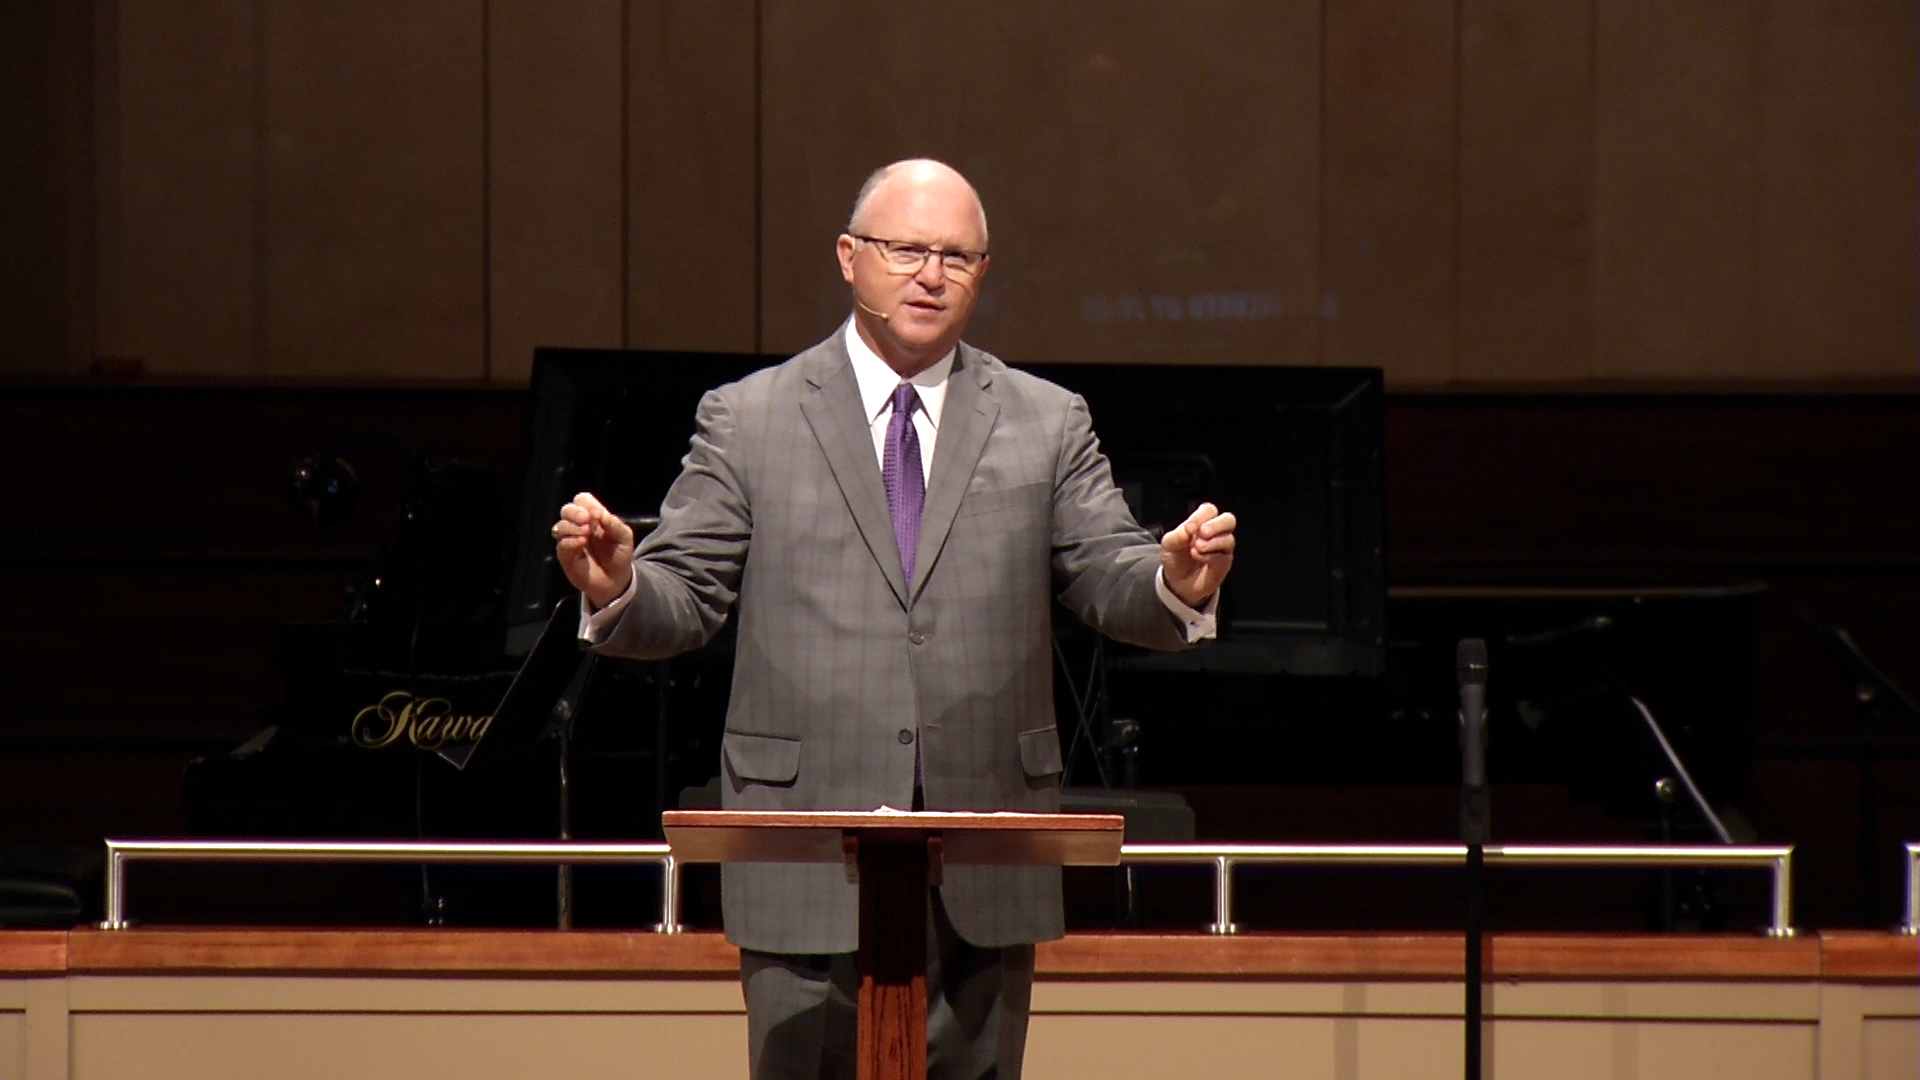 Pastor Paul Chappell: Jesus Changes Everything